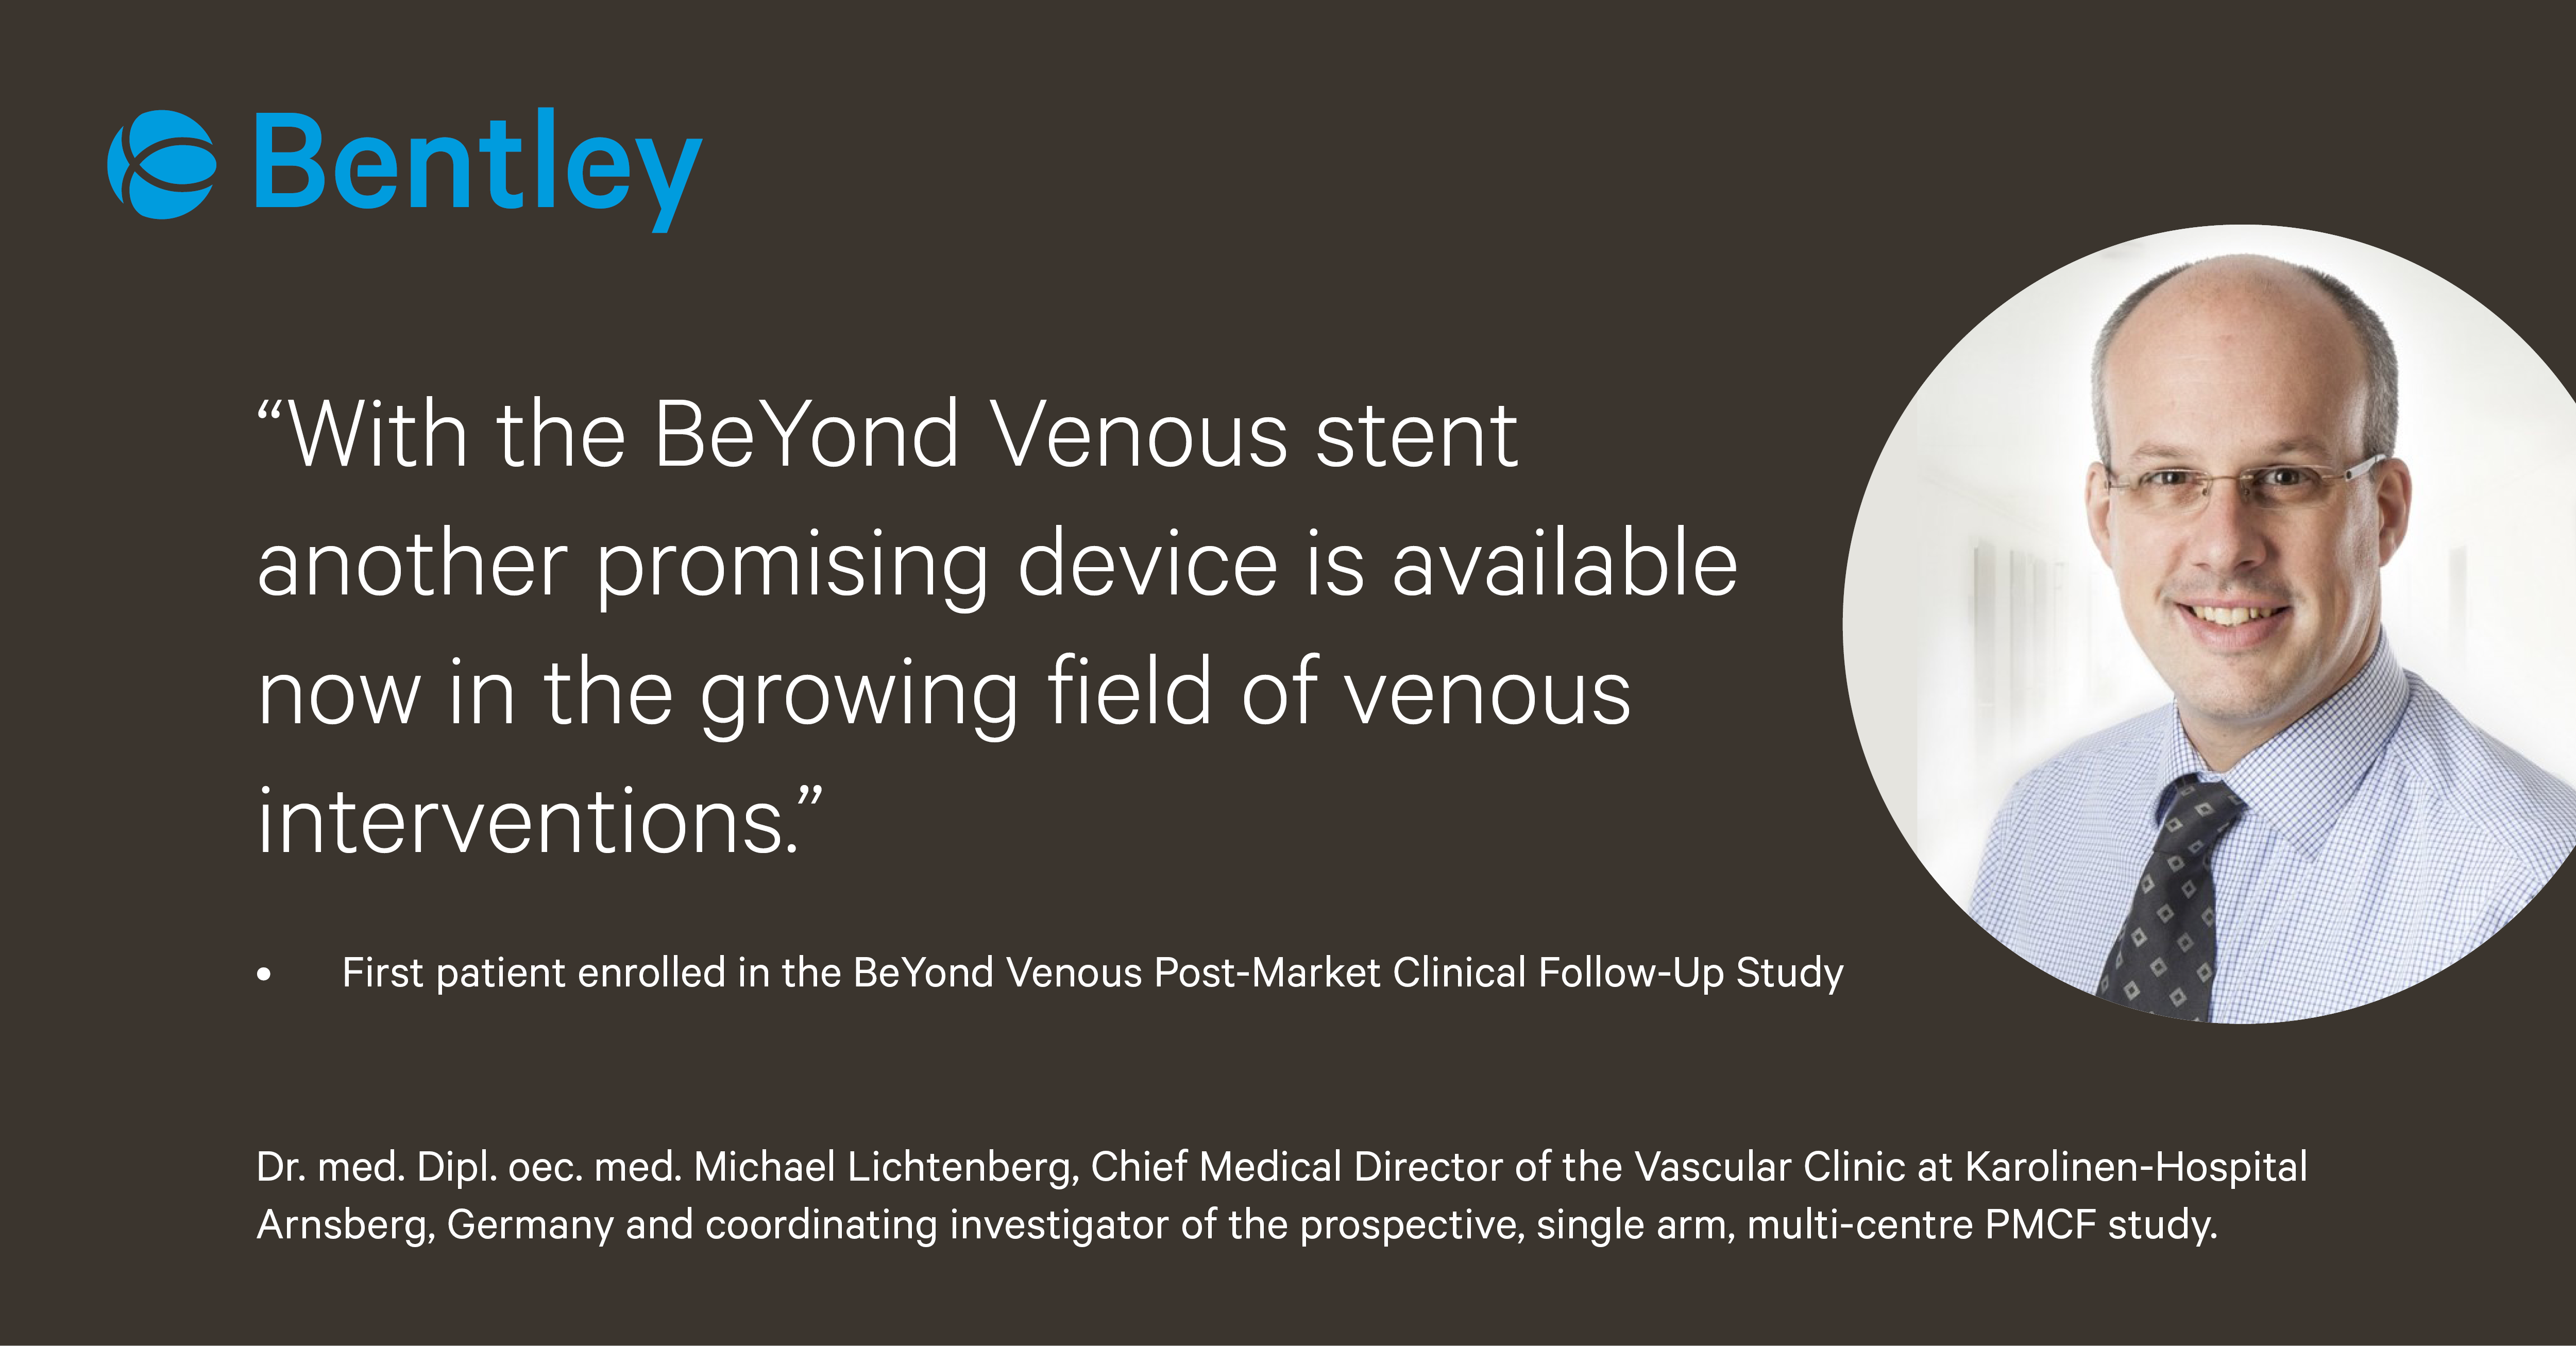 First patient enrolled in Post-Market Clinical Follow-Up study for the BeYond Venous Self-Expanding Stent System